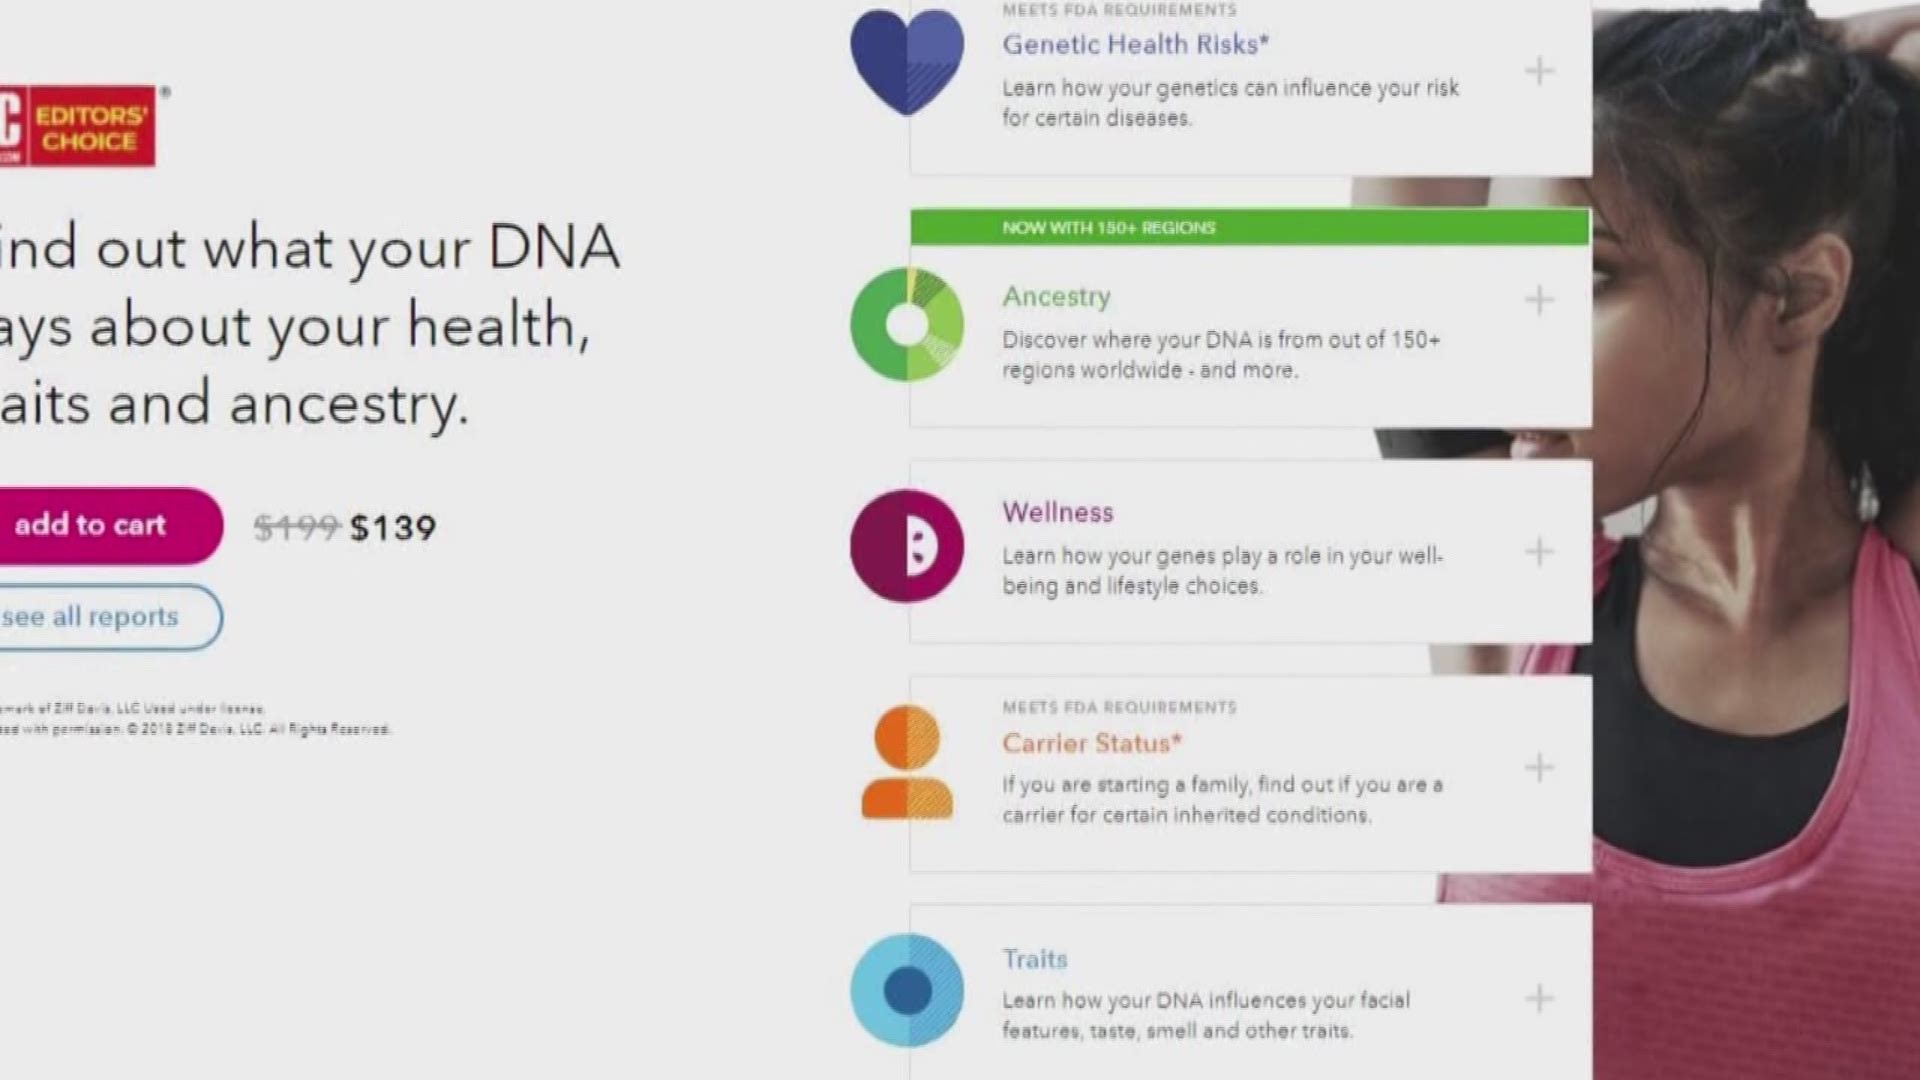 At-home DNA tests offer health information that can put people in a tizzy. But are they accurate and is your DNA data safe with them?